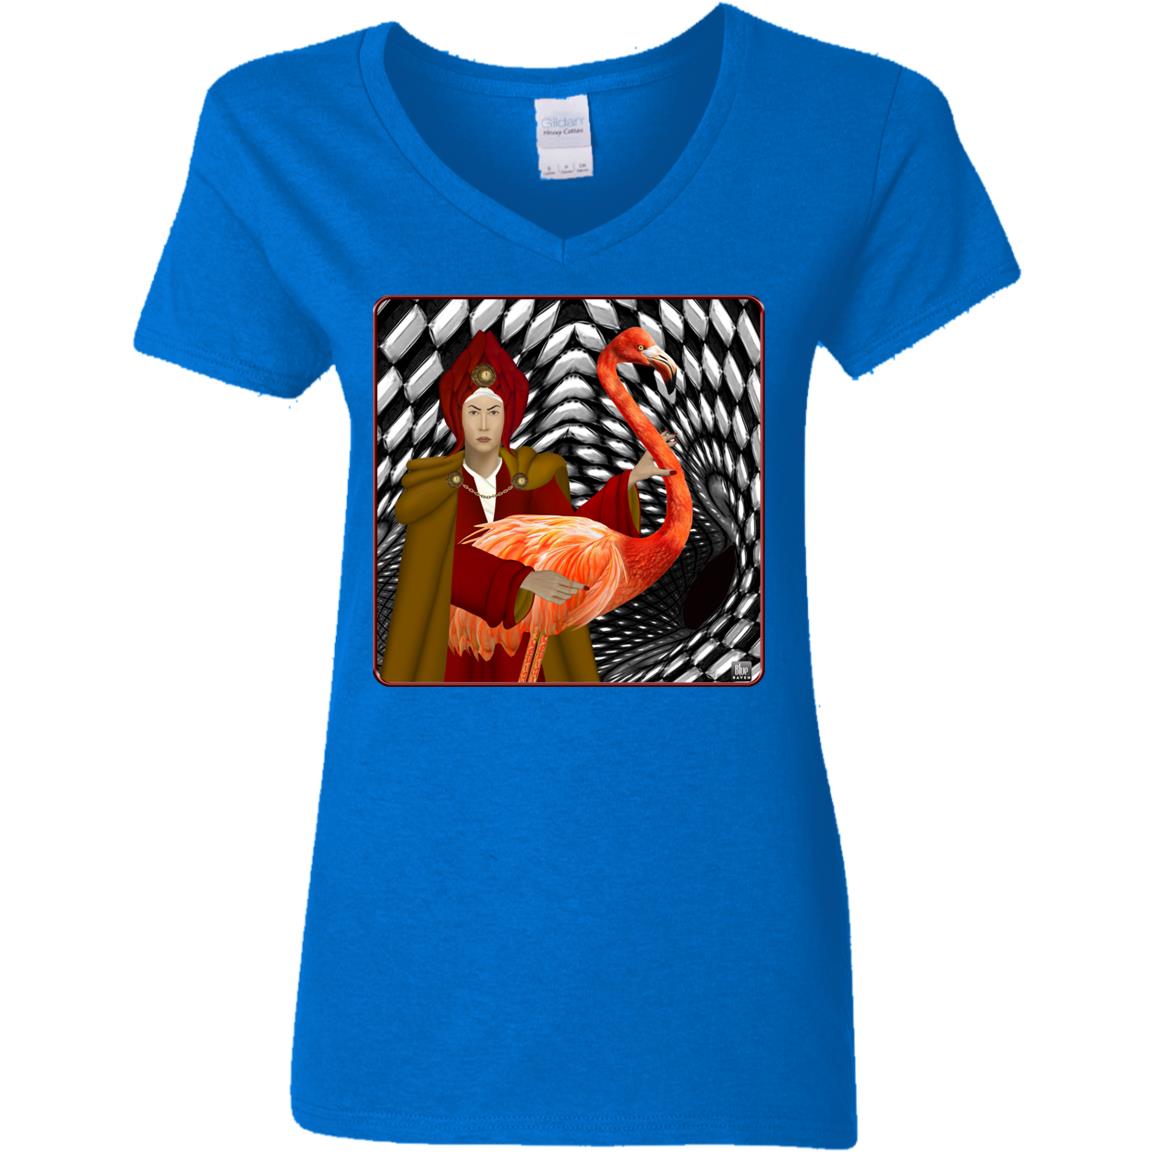 The Red Queen With The Flamingo - Women's V-Neck T Shirt